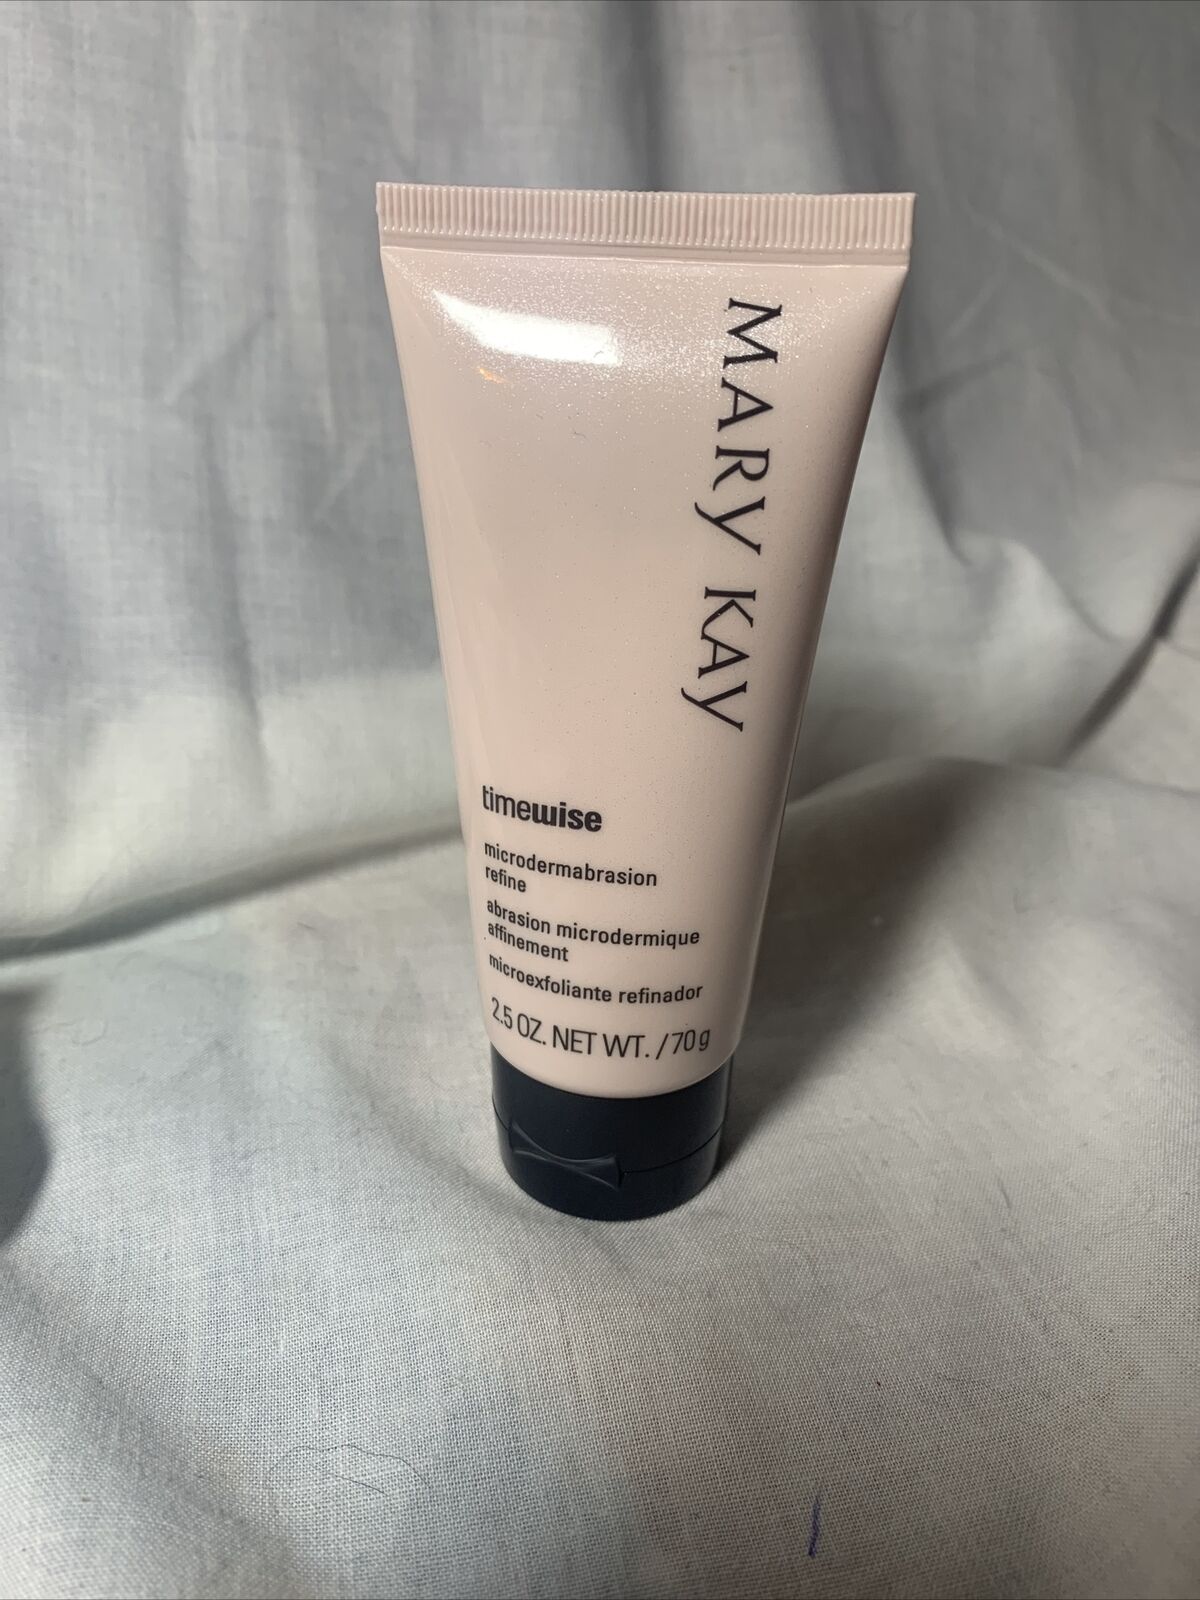 New No Box Mary Kay Timewise Microdermabrasion Step 1 : Refine Full Size ~2.5 Oz